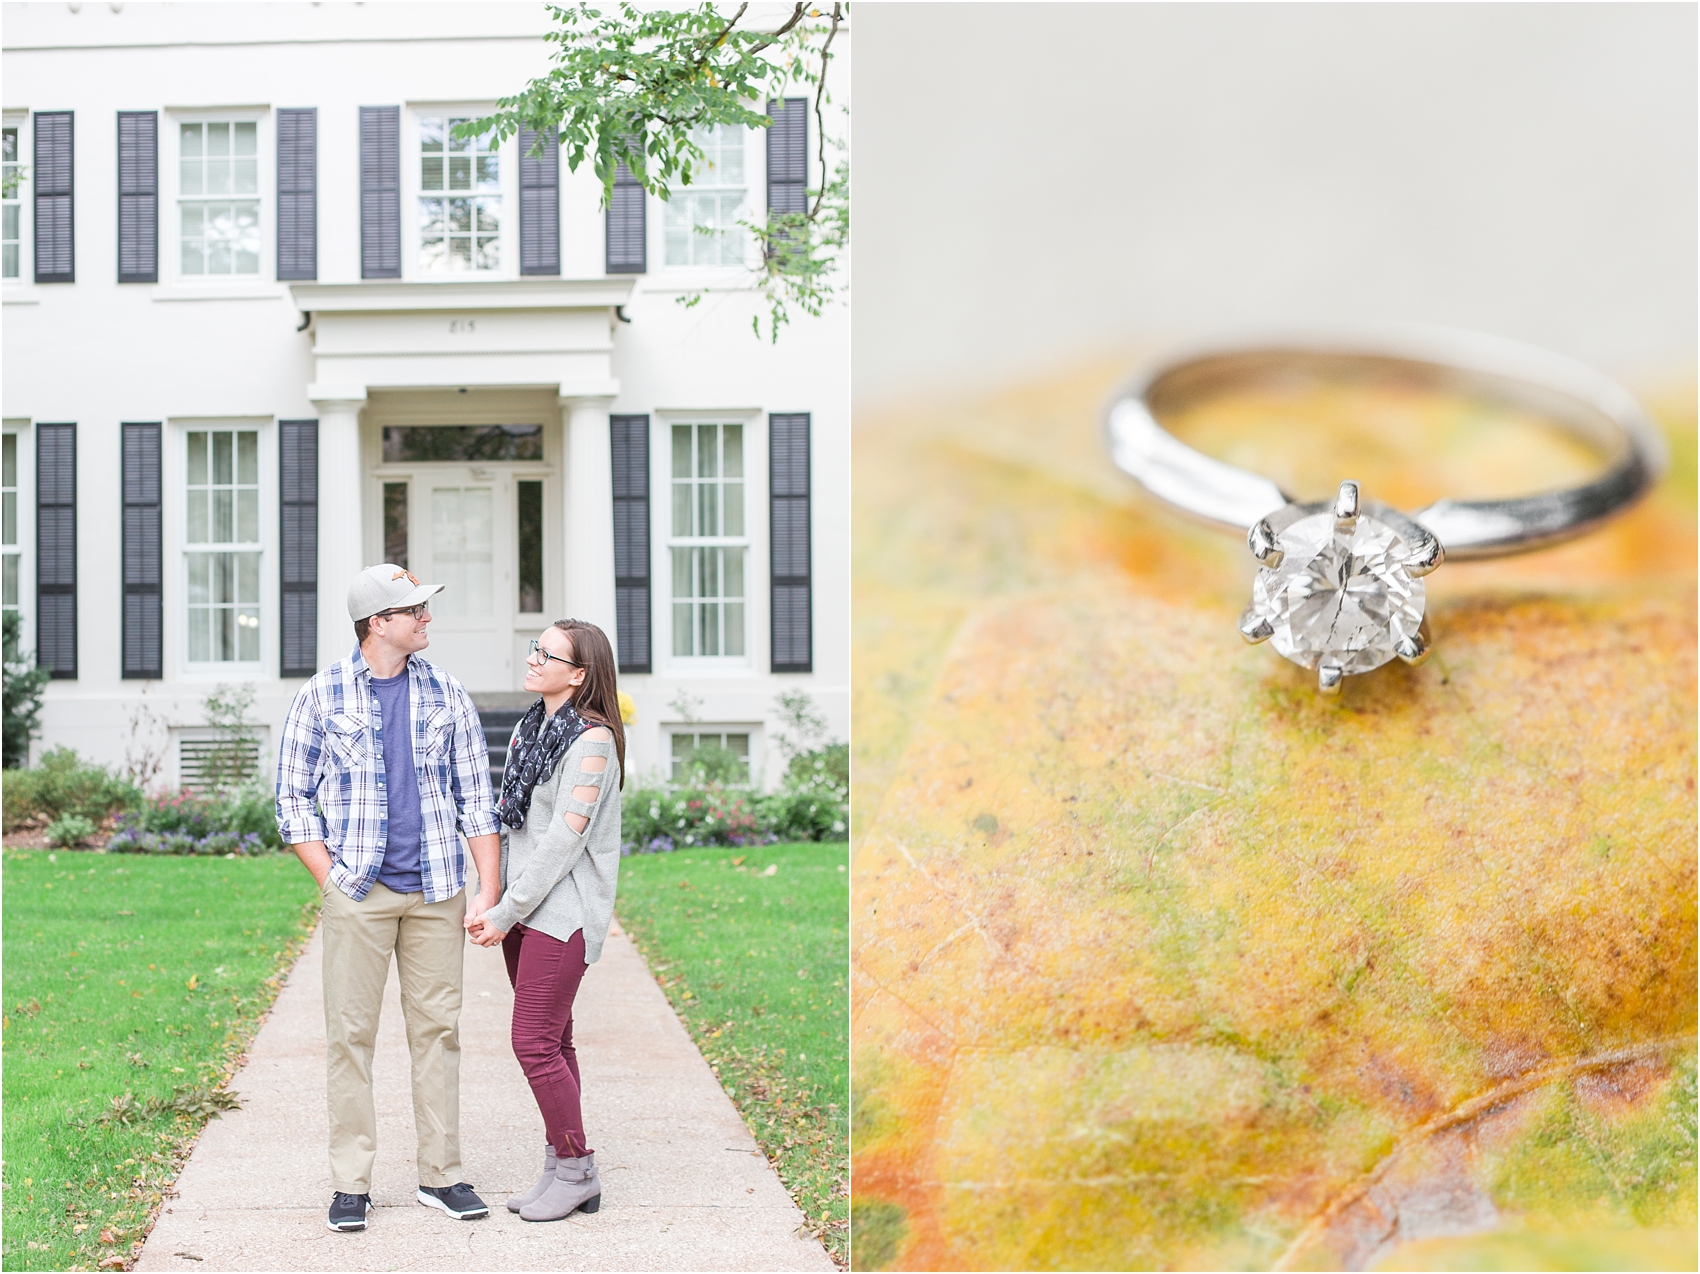 classic-fall-engagement-photos-at-the-university-of-michigan-in-ann-arbor-mi-by-courtney-carolyn-photography_0001.jpg